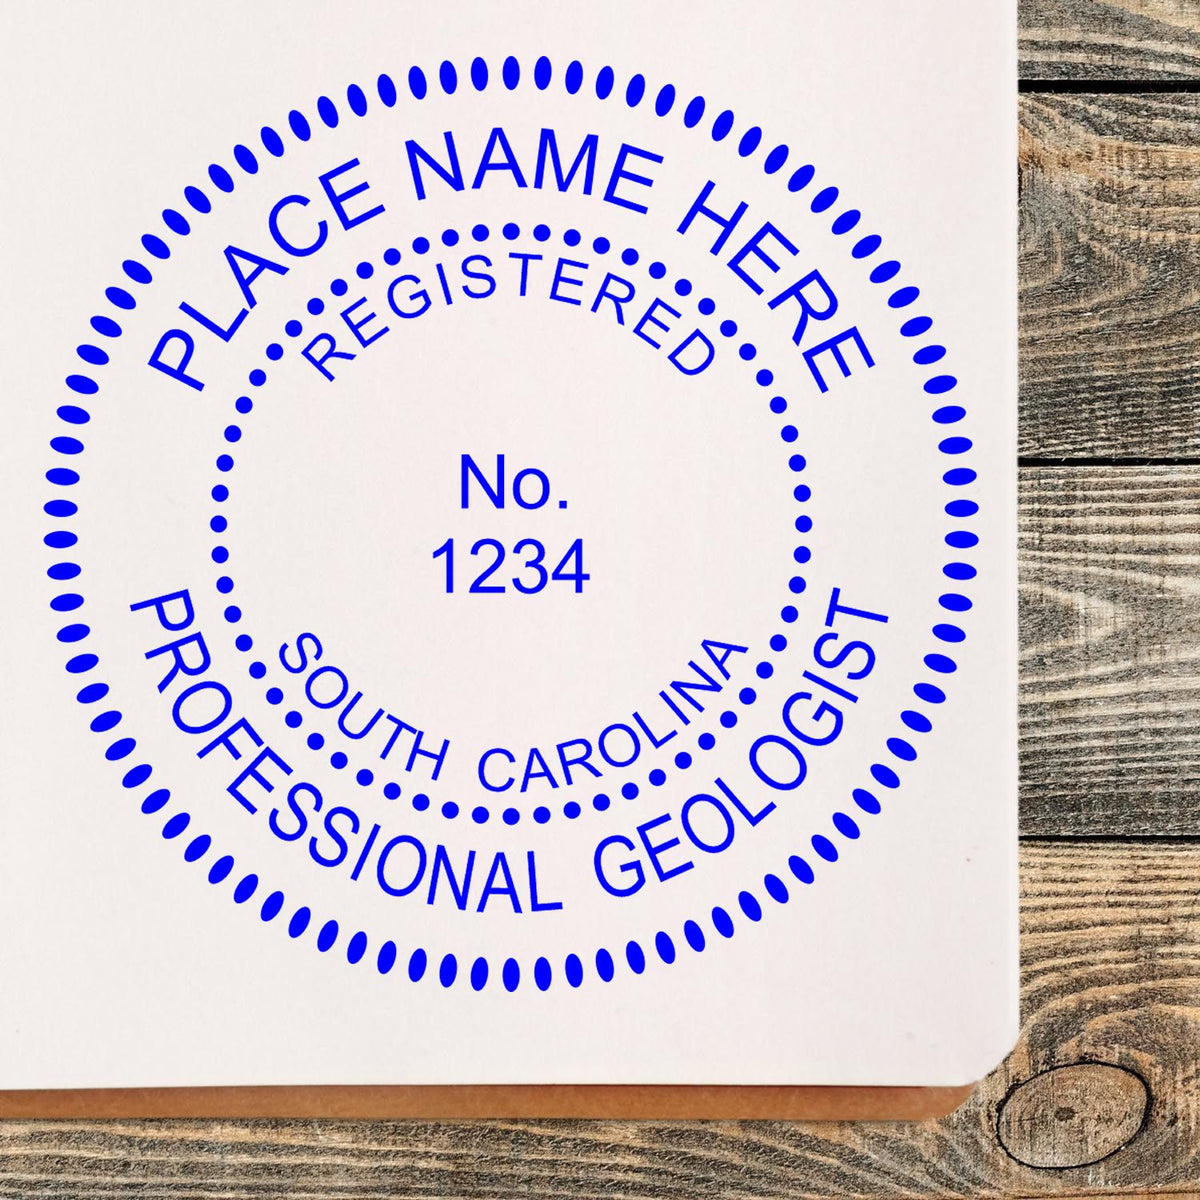 A lifestyle photo showing a stamped image of the Digital South Carolina Geologist Stamp, Electronic Seal for South Carolina Geologist on a piece of paper